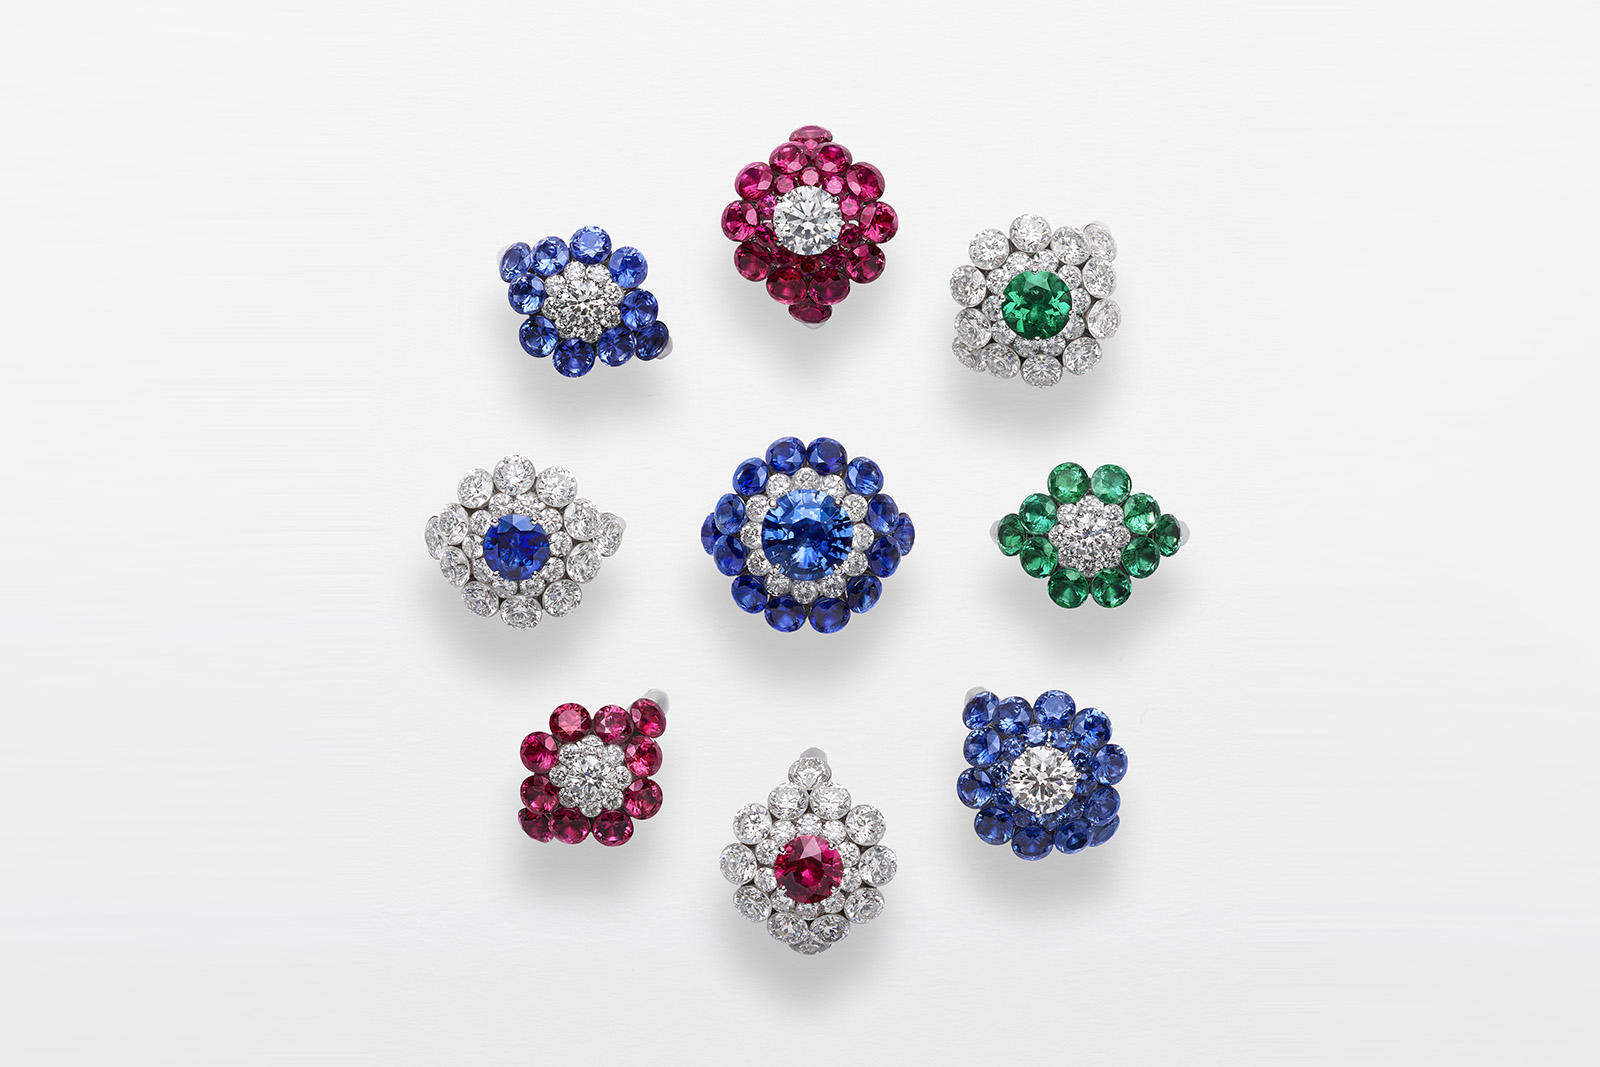 A selection of Chopard 'Magical Setting' rings in diamonds, sapphires, emeralds and rubies in 18k white gold